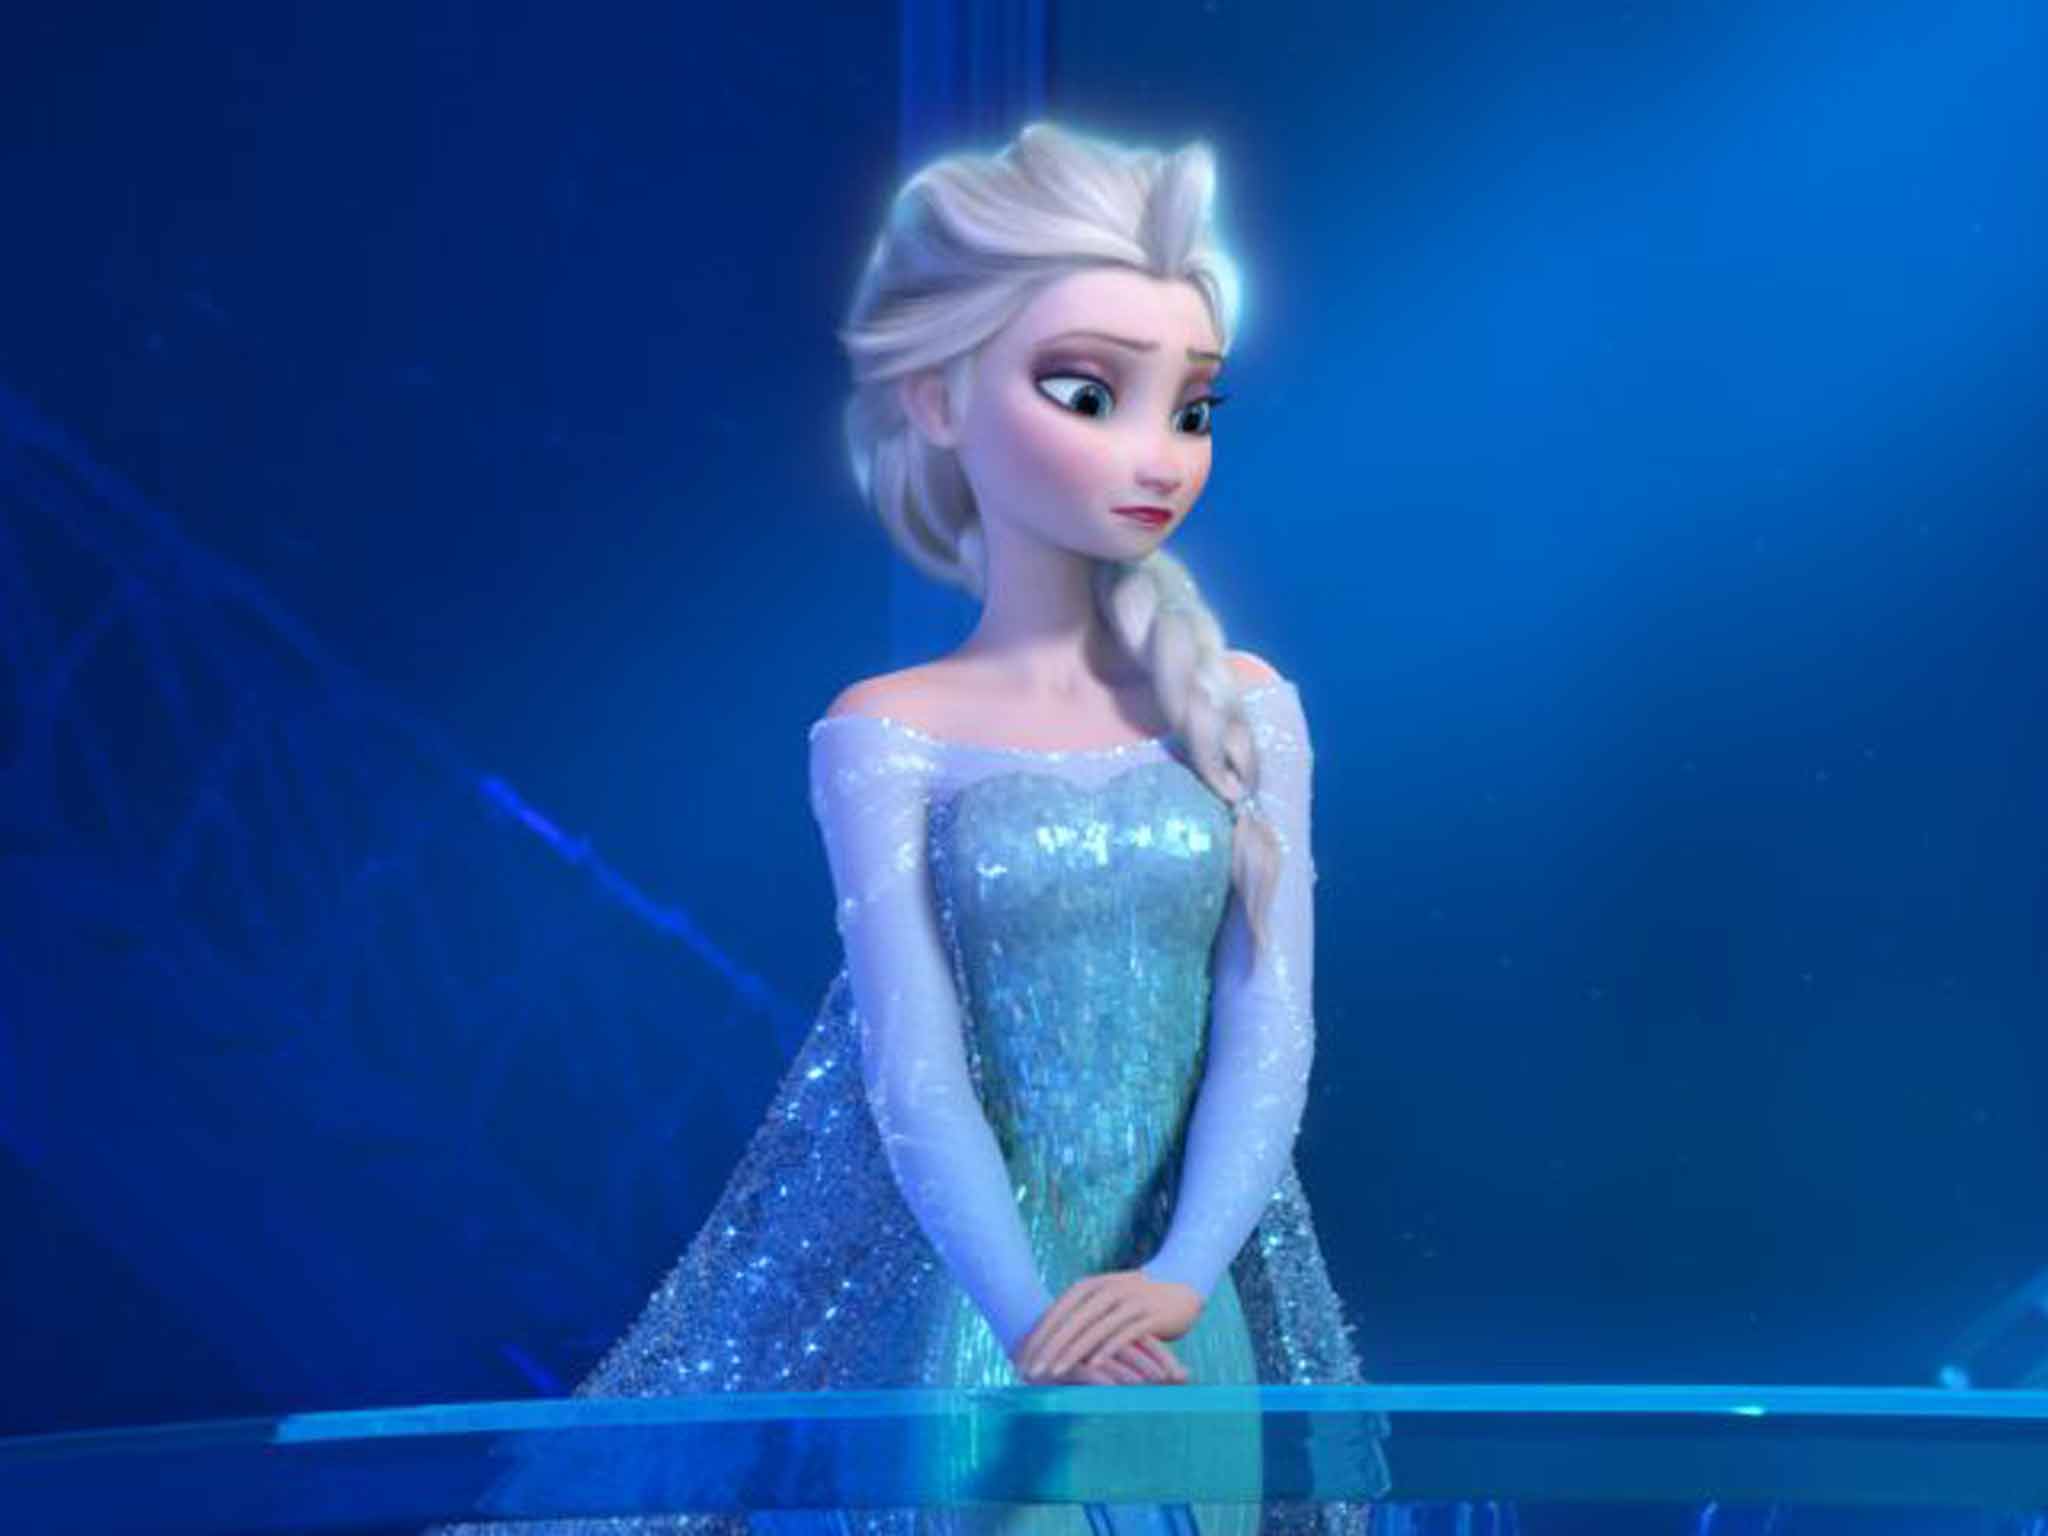 Elsa from Frozen looks none to happy about China's Winter Olympics song